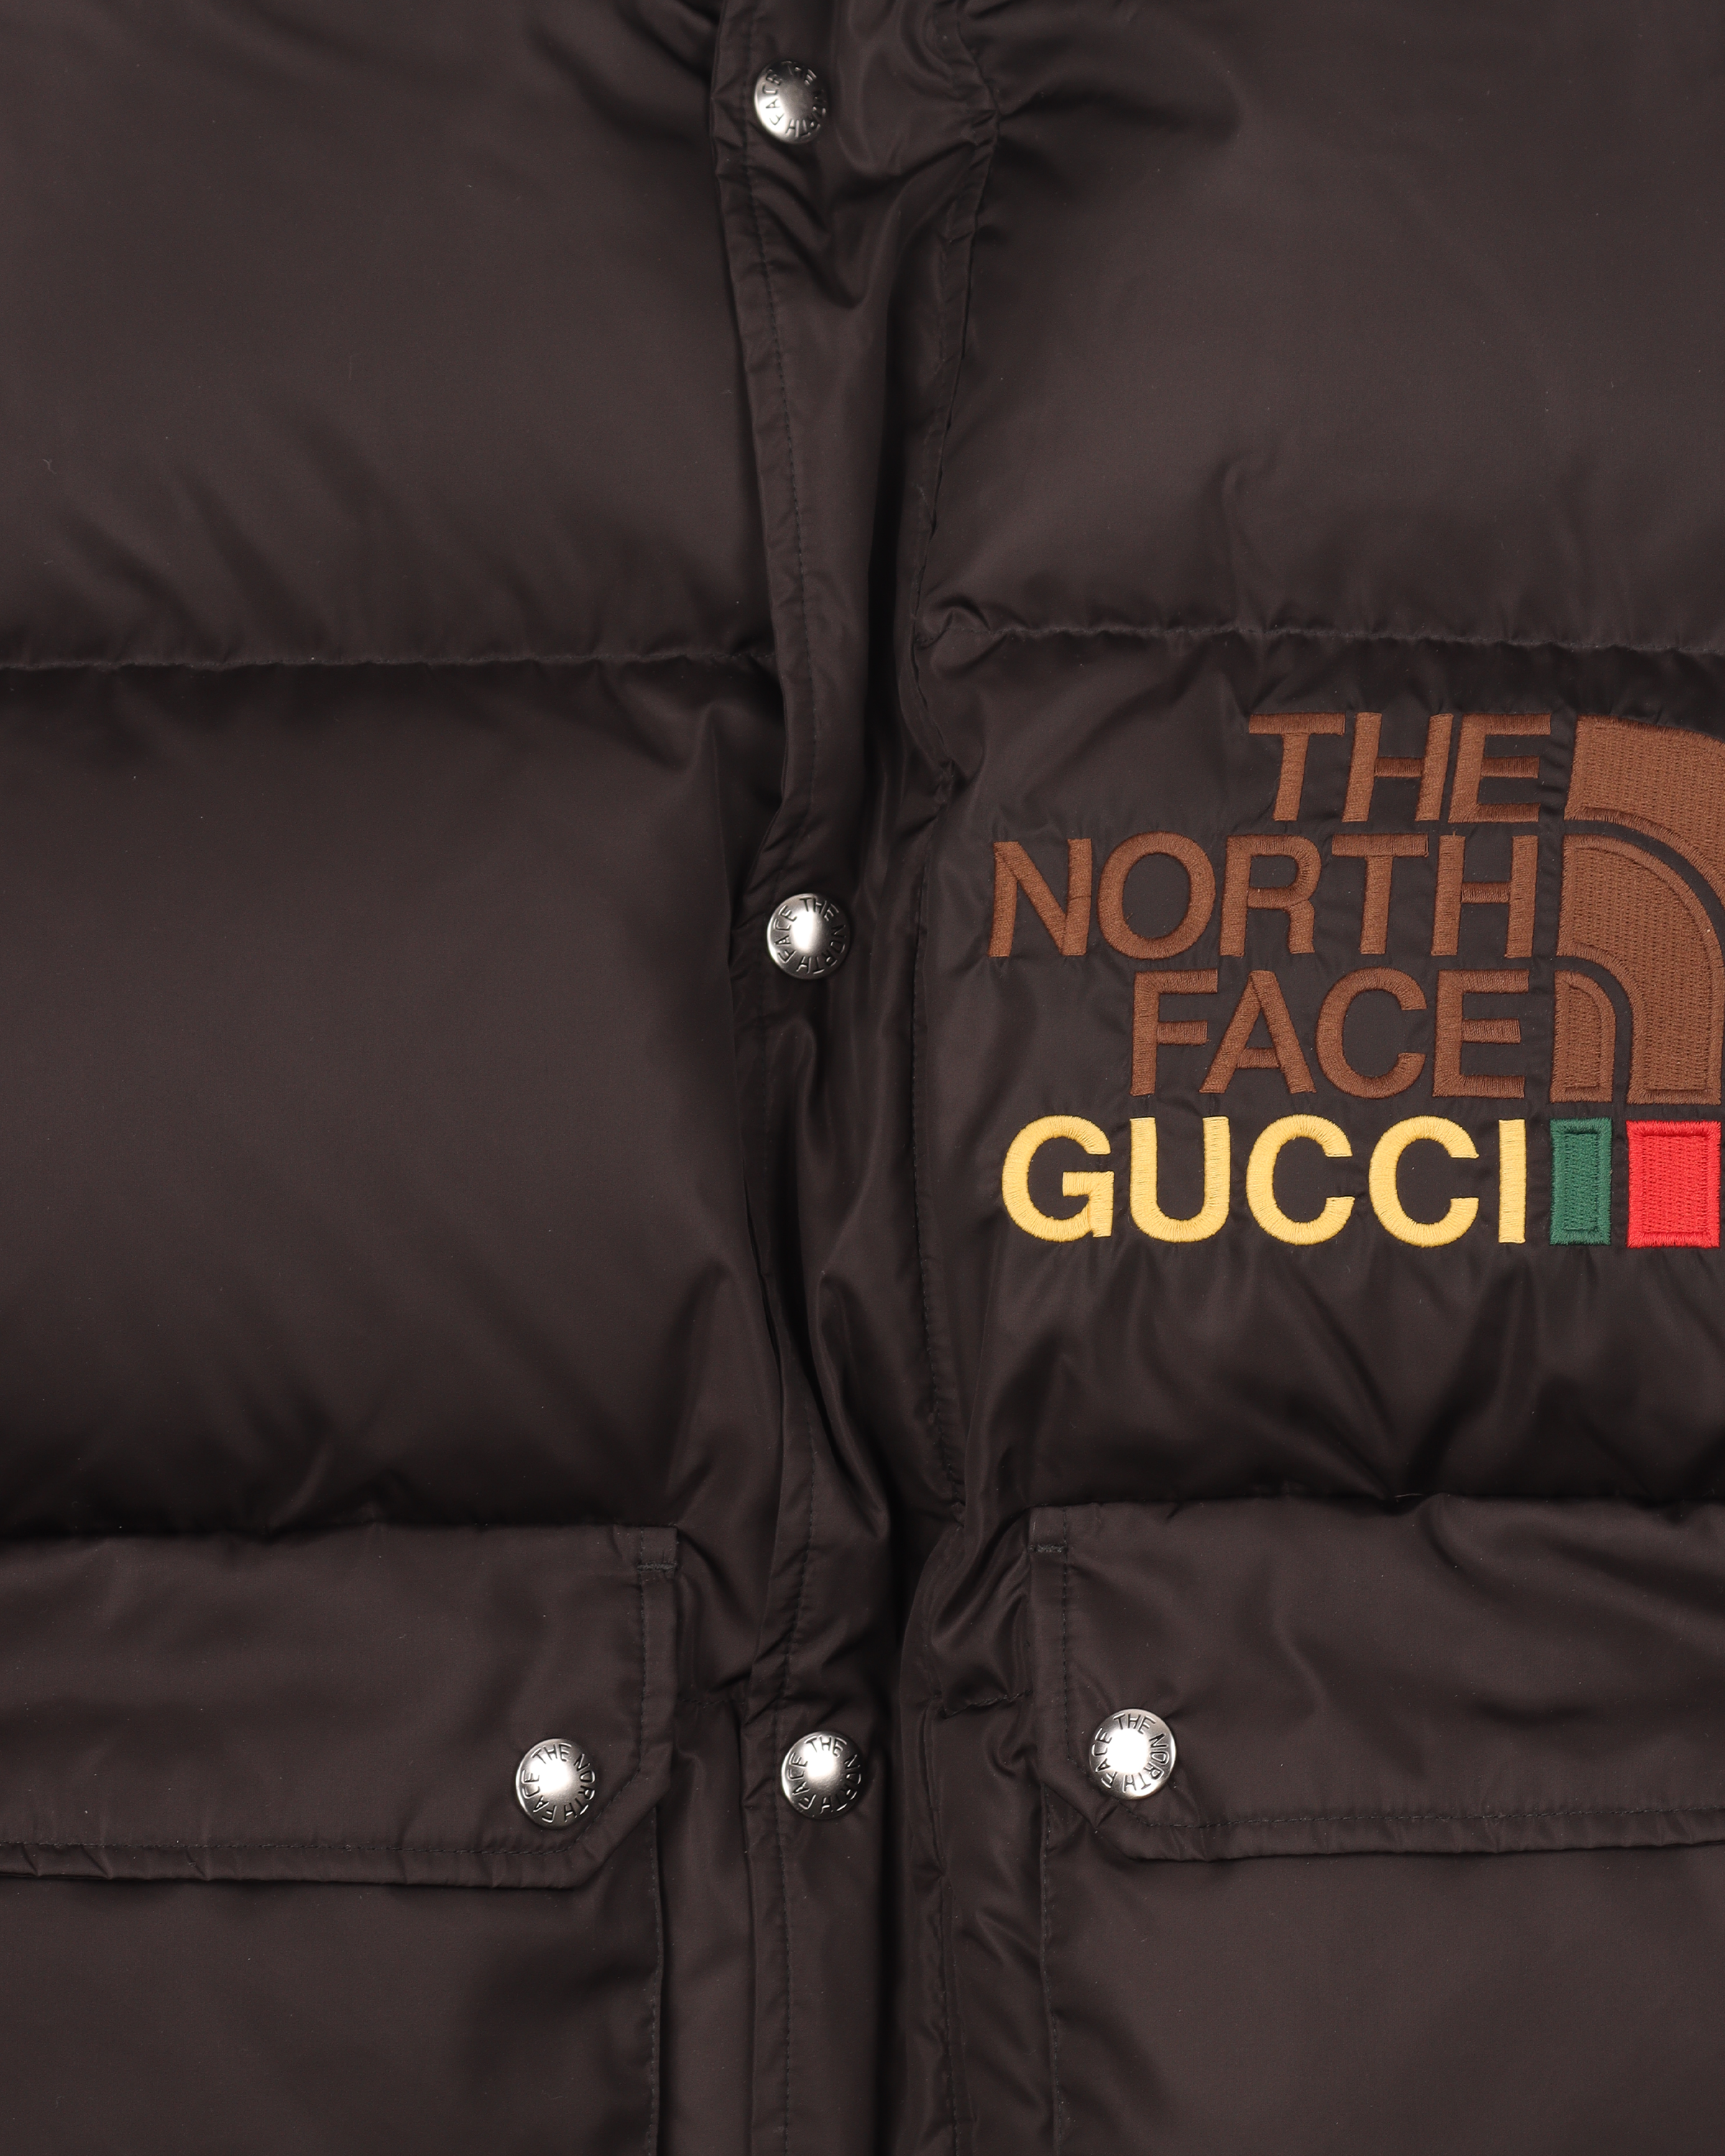 The North Face x Gucci nylon bomber jacket in black